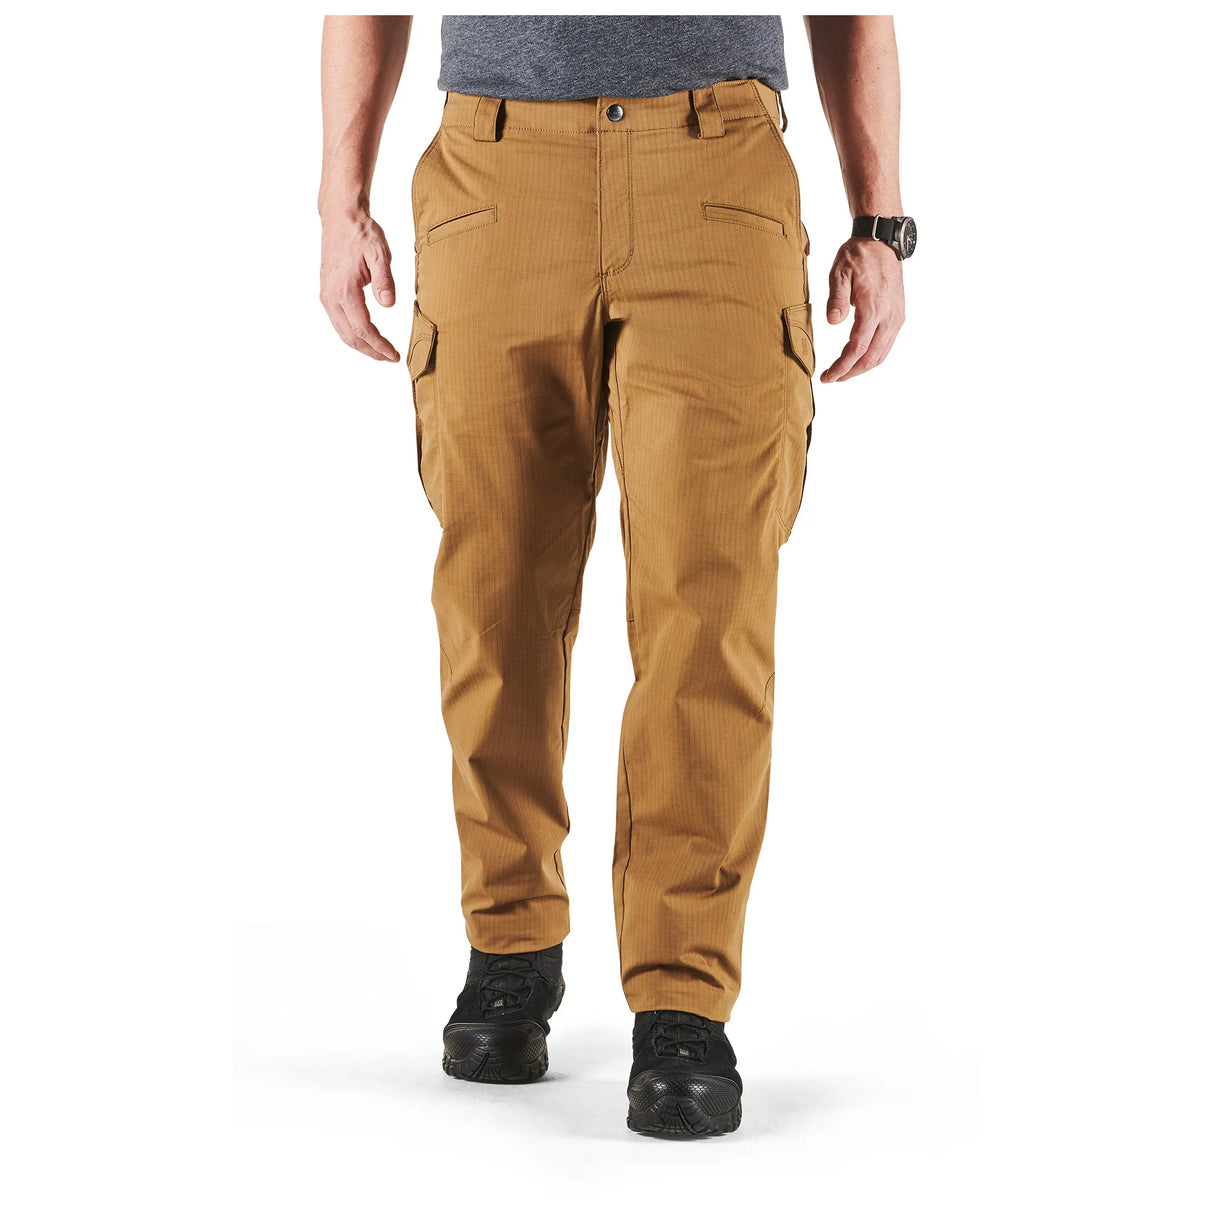 Versatile Work Apparel: Ideal for professionals in various industries seeking performance and comfort.